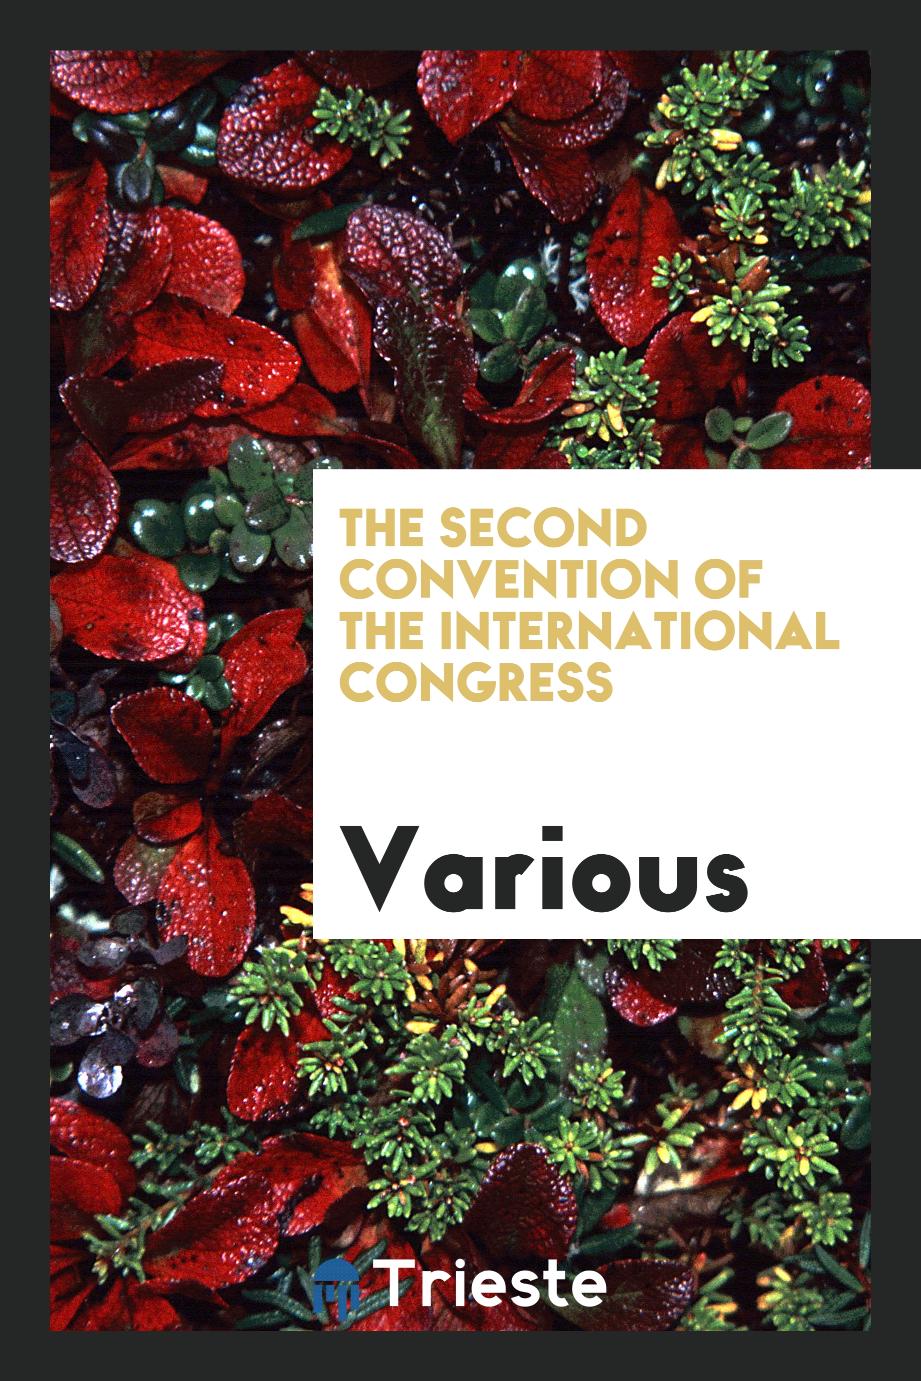 The Second Convention of the International Congress